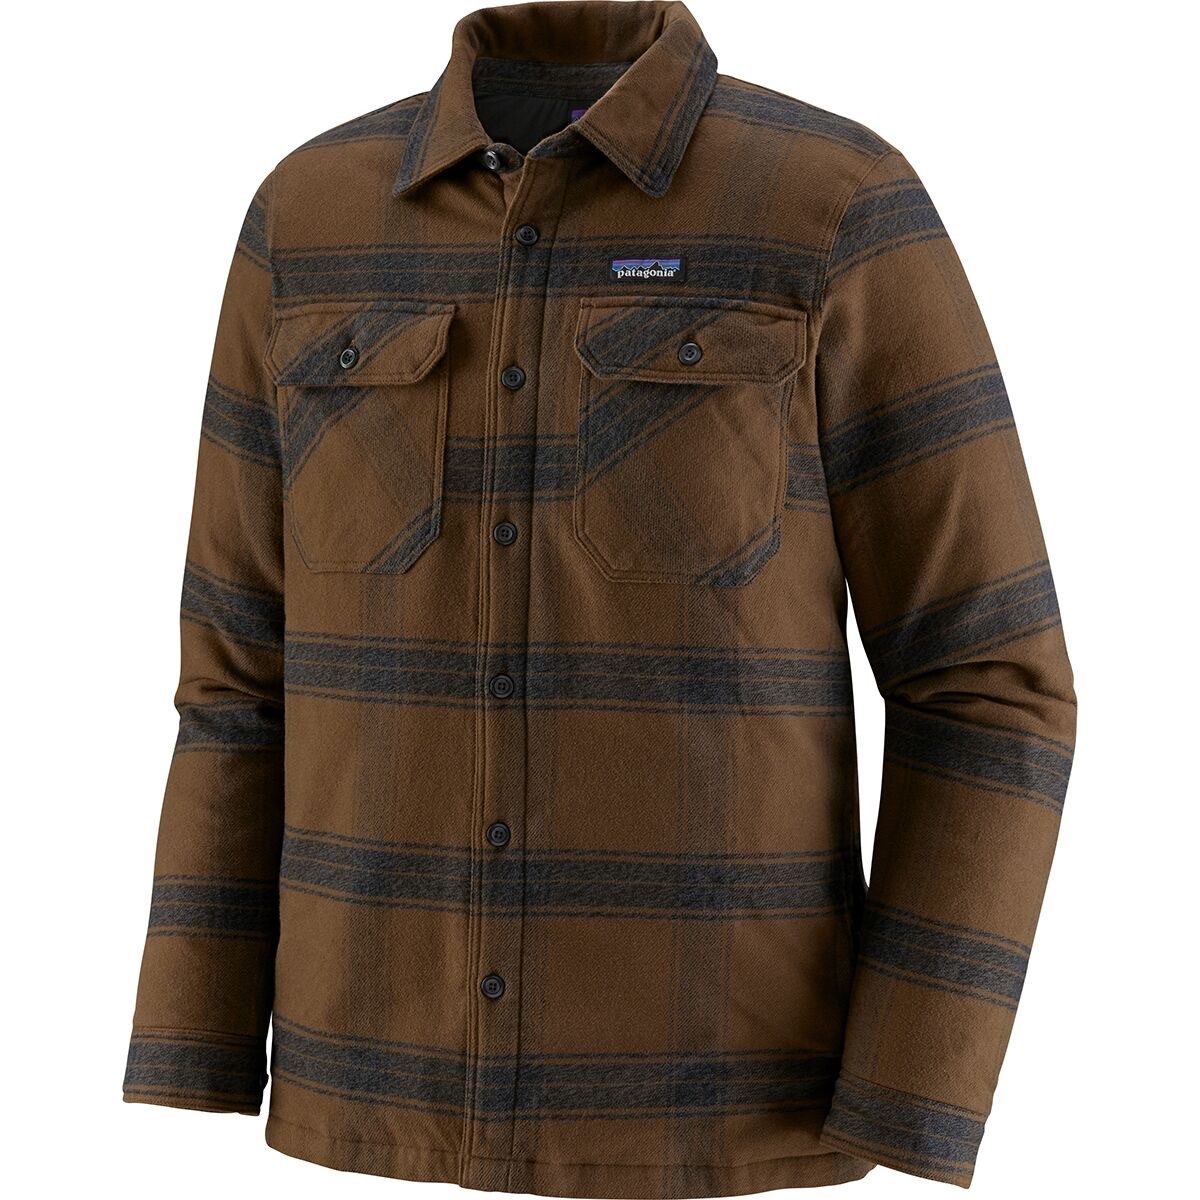 Men's Insulated Fjord Flannel Jacket